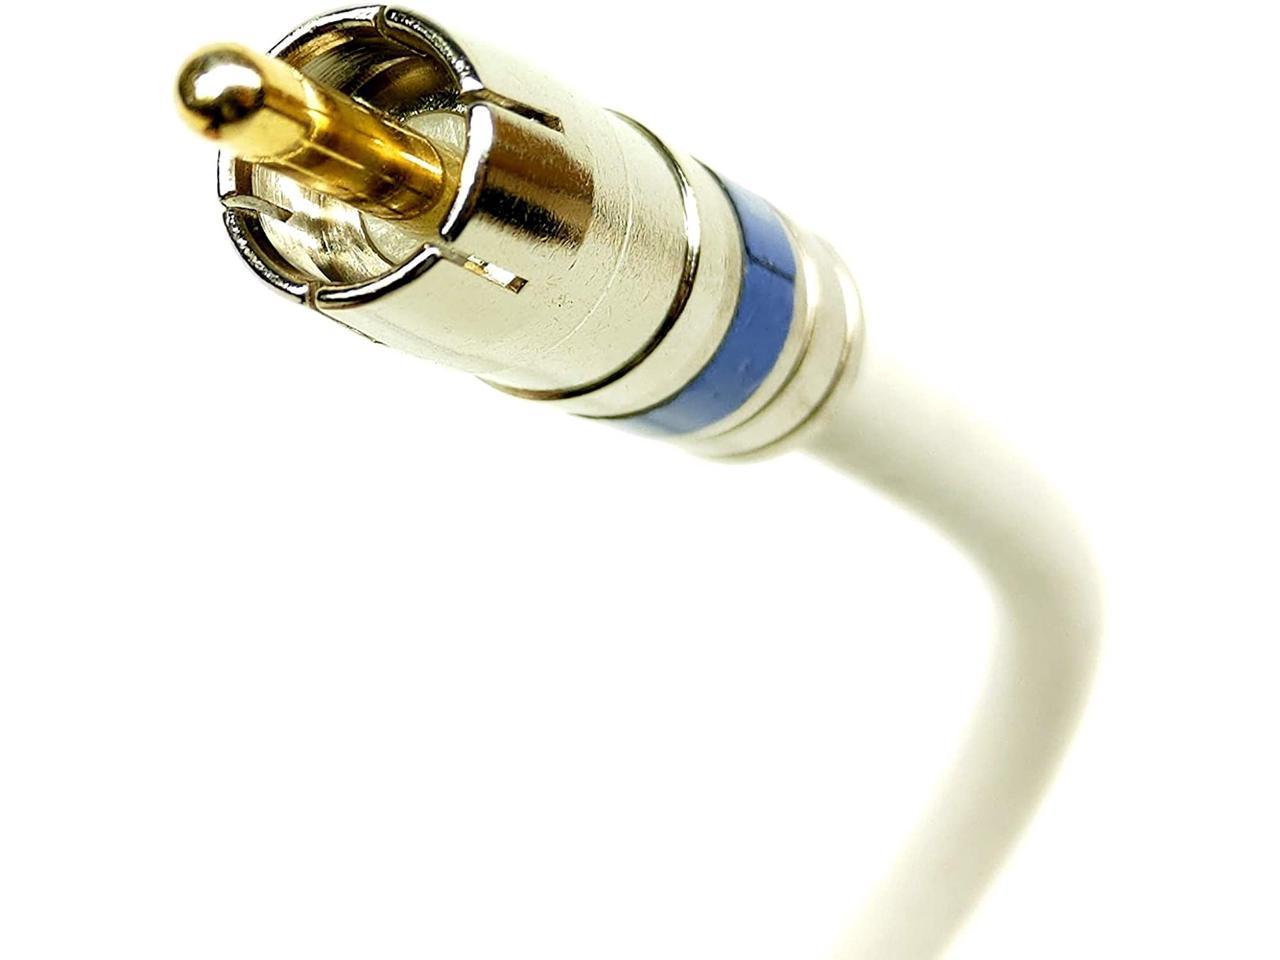 PSI - RCA Audio Cable, Bare Copper 18 AWG Solid Core Center Conductor, Gold Plated Pin, Brass Fittings, Bi-Shield 60% Braid 100% Foil, Custom Cut and Assembled in USA (51 - 100 feet, White)